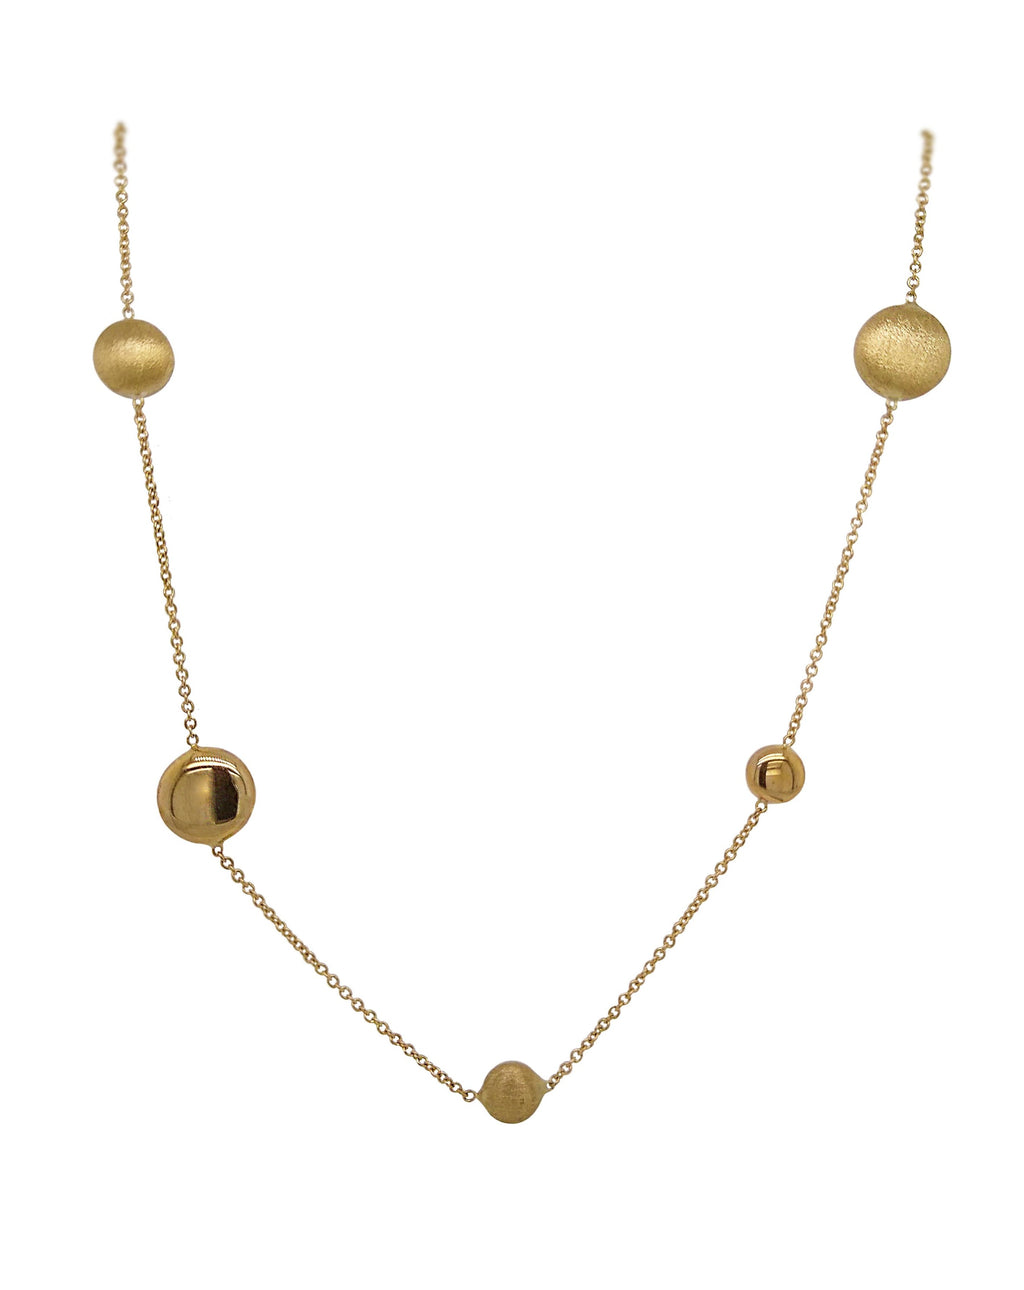 9ct Yellow Gold Beaded Necklace